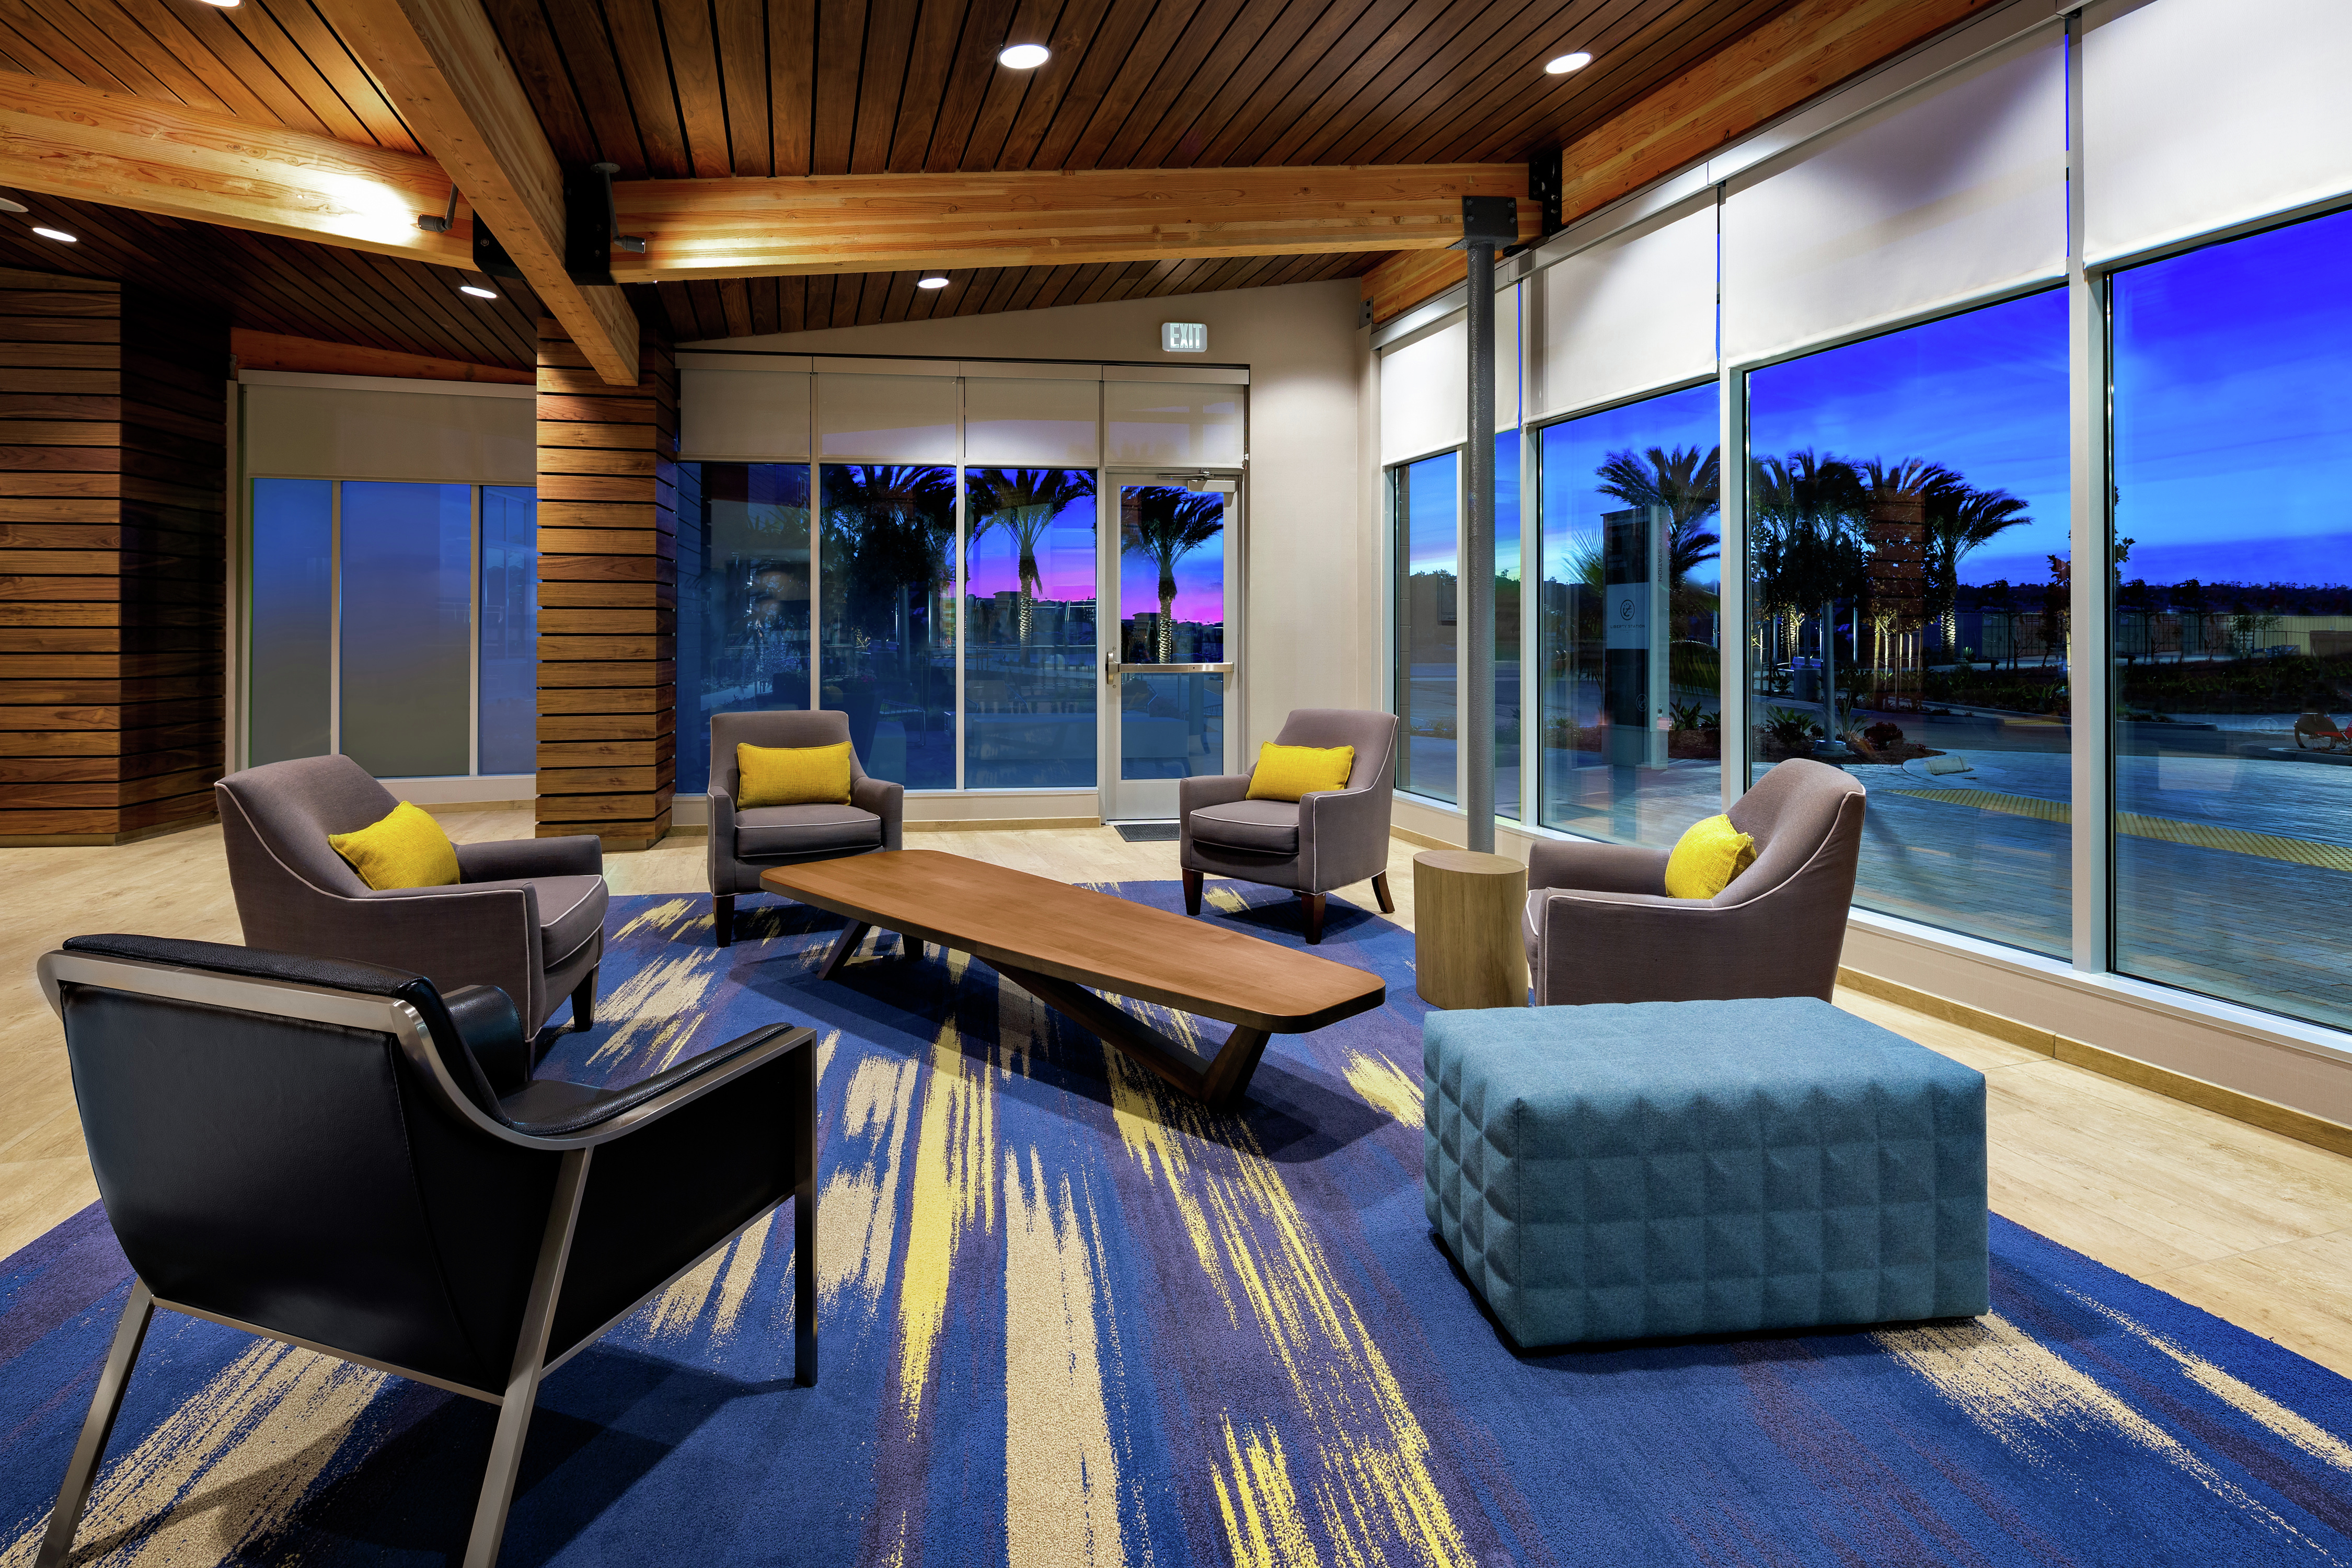 Lobby Seating Area at Night